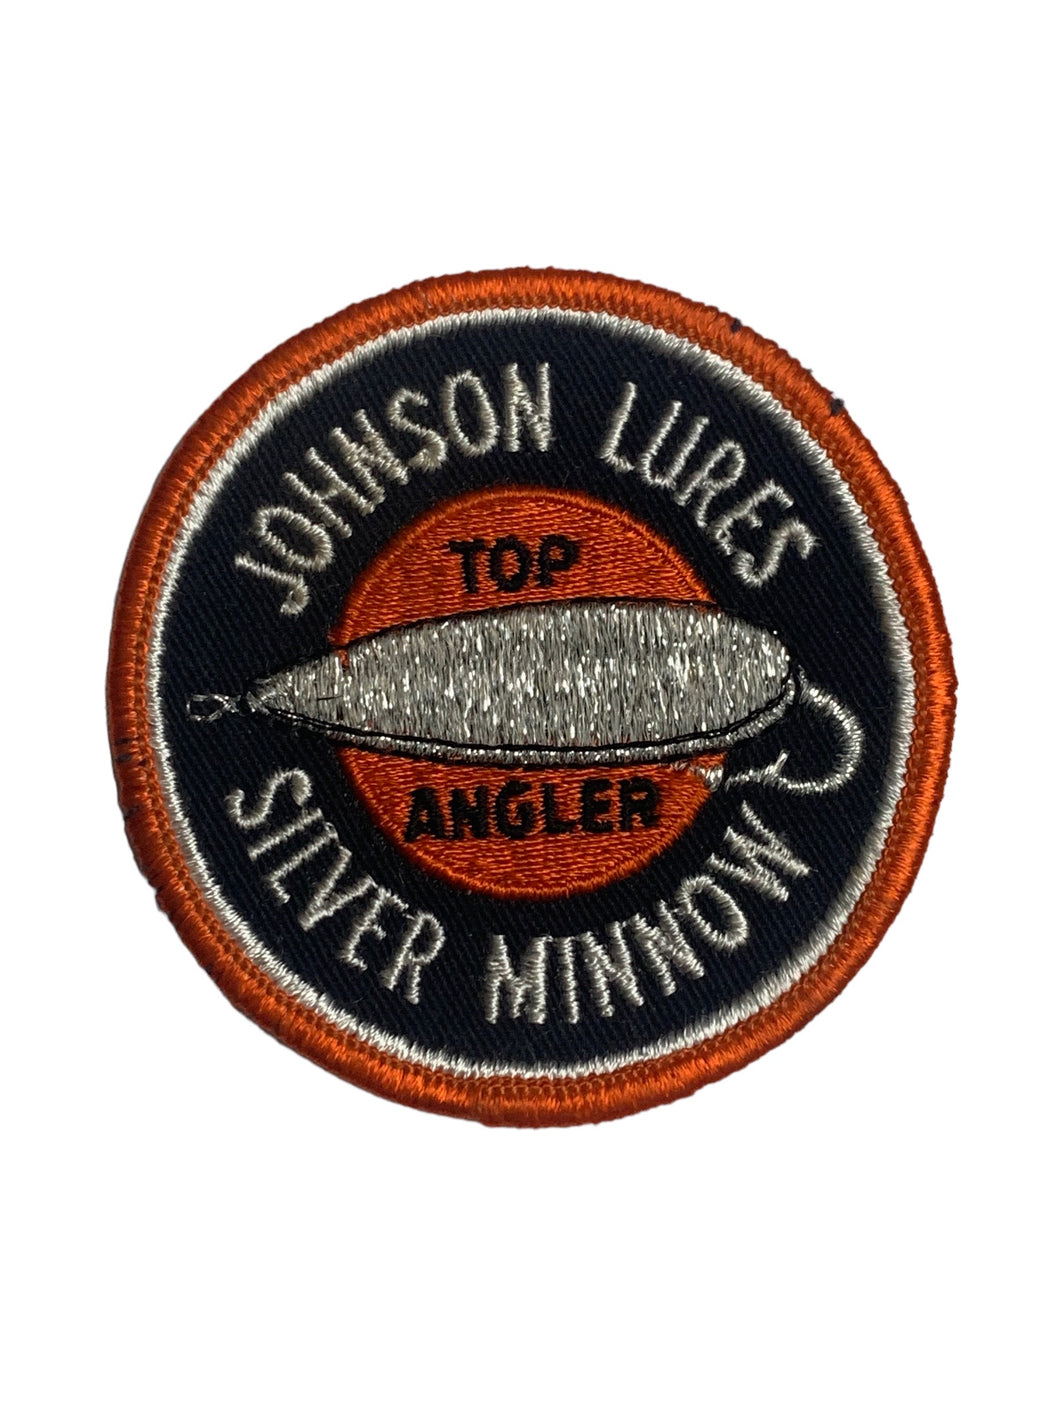 JOHNSON LURES SILVER MINNOW Vintage Patch • TOP ANGLER